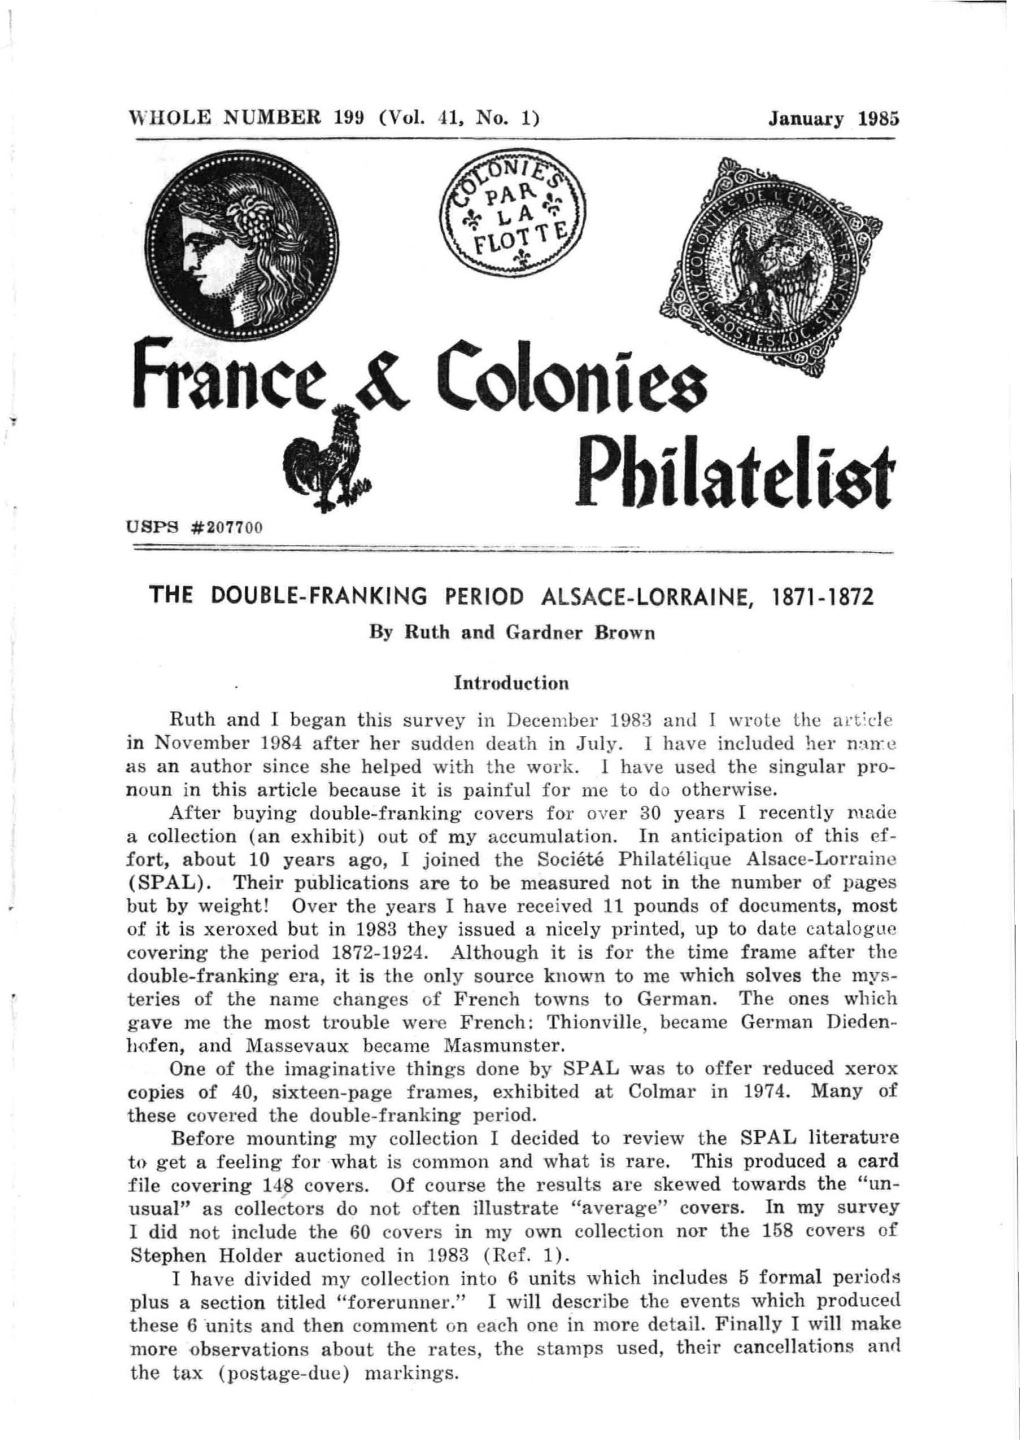 THE DOUBLE-FRANKING PERIOD ALSACE-LORRAINE, 1871-1872 by Ruth and Gardner Brown